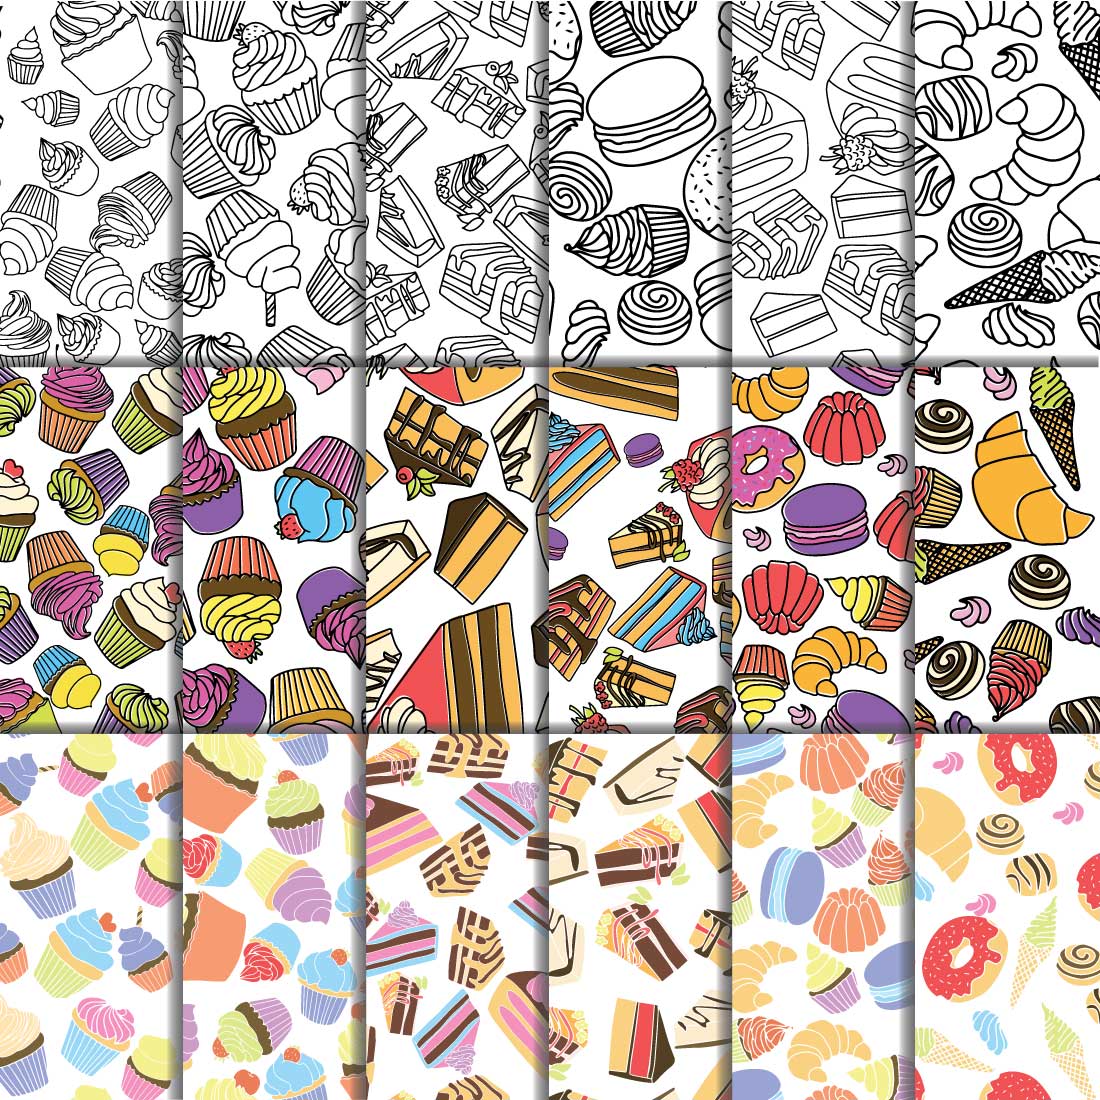 Collection of enchanting images of patterns of sweets